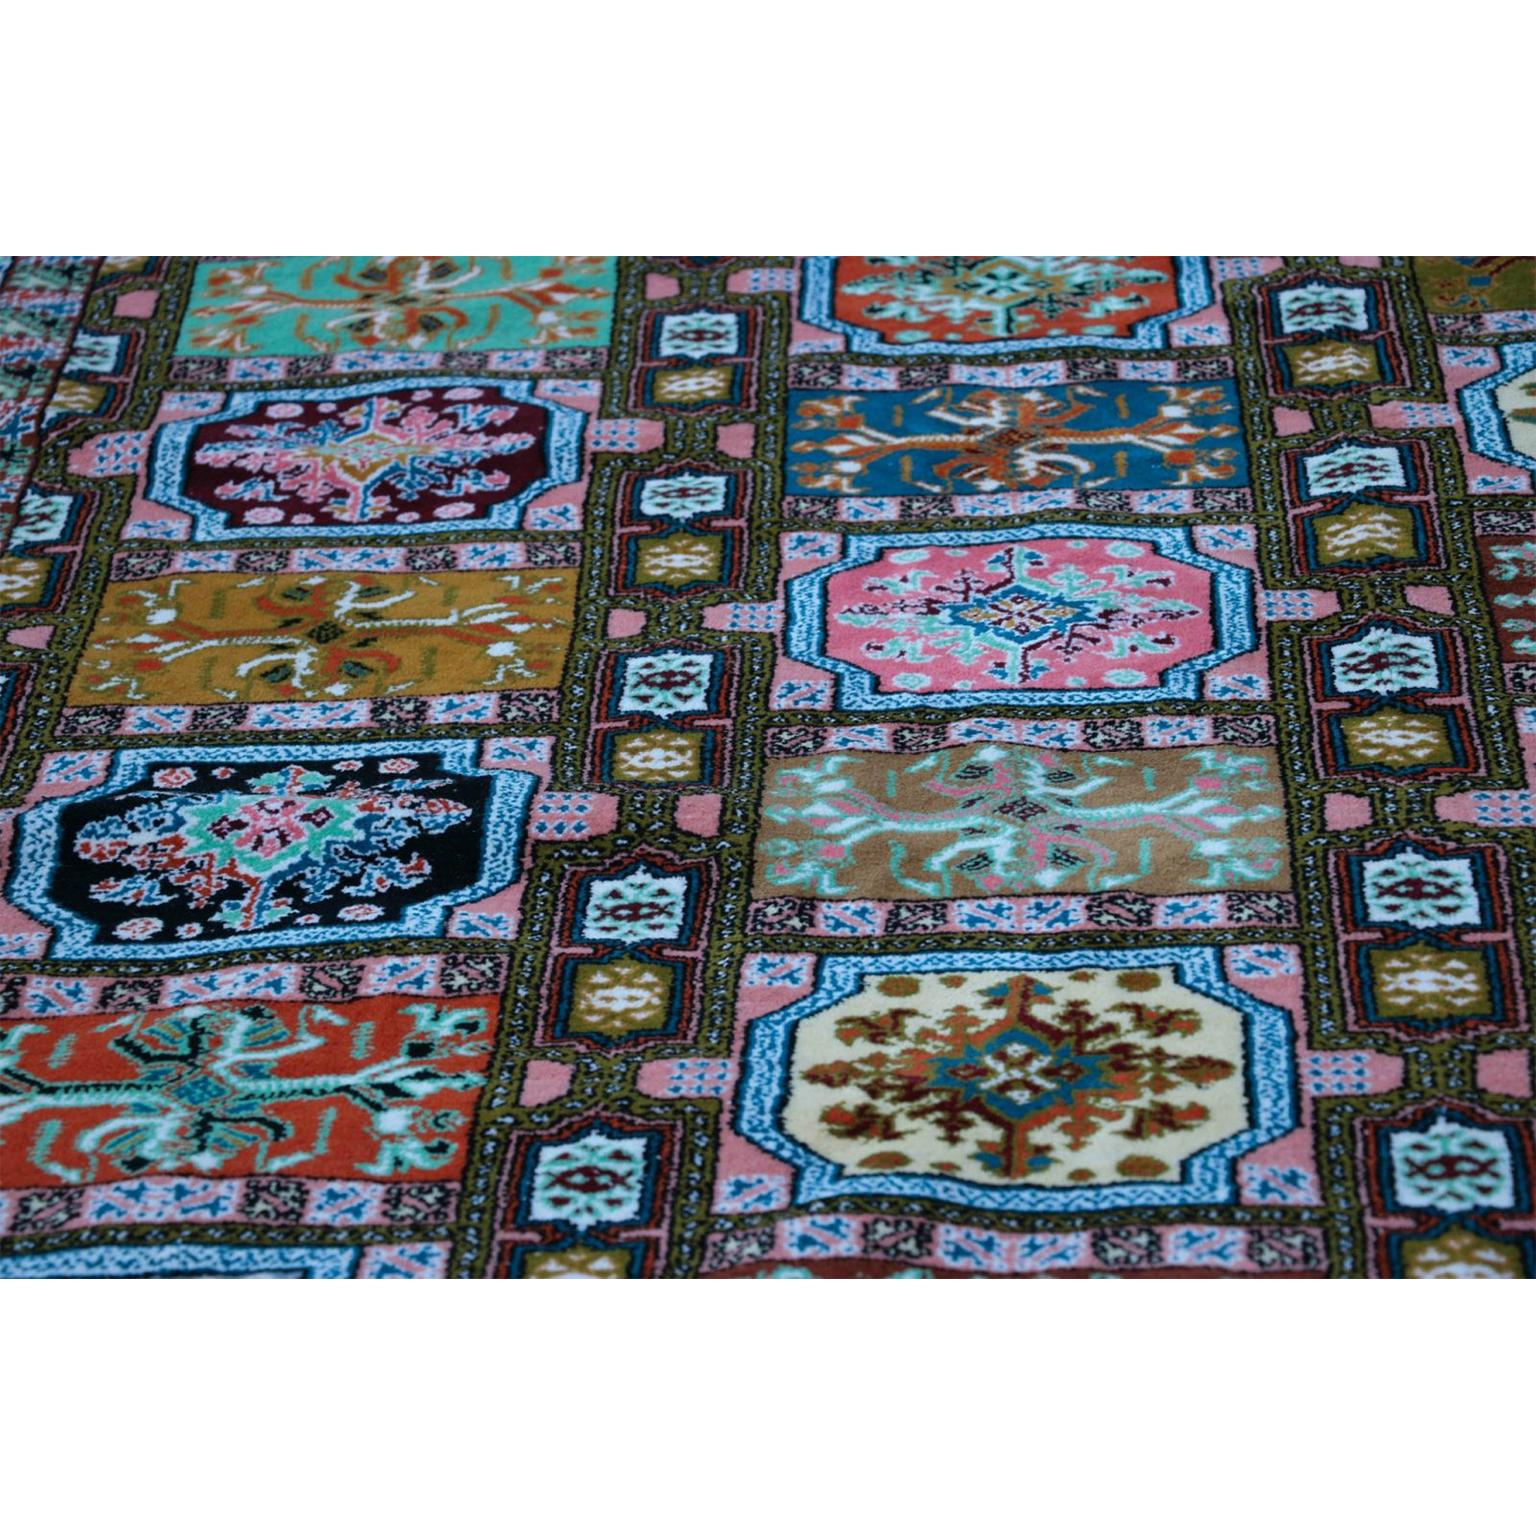 A positively gorgeous African rug from the region of Morocco or Tunisia. It is an interesting and highly complex canopy of colors for your floor, the host of woven durable full pile fibers, geometrical representations of intricate designs that take